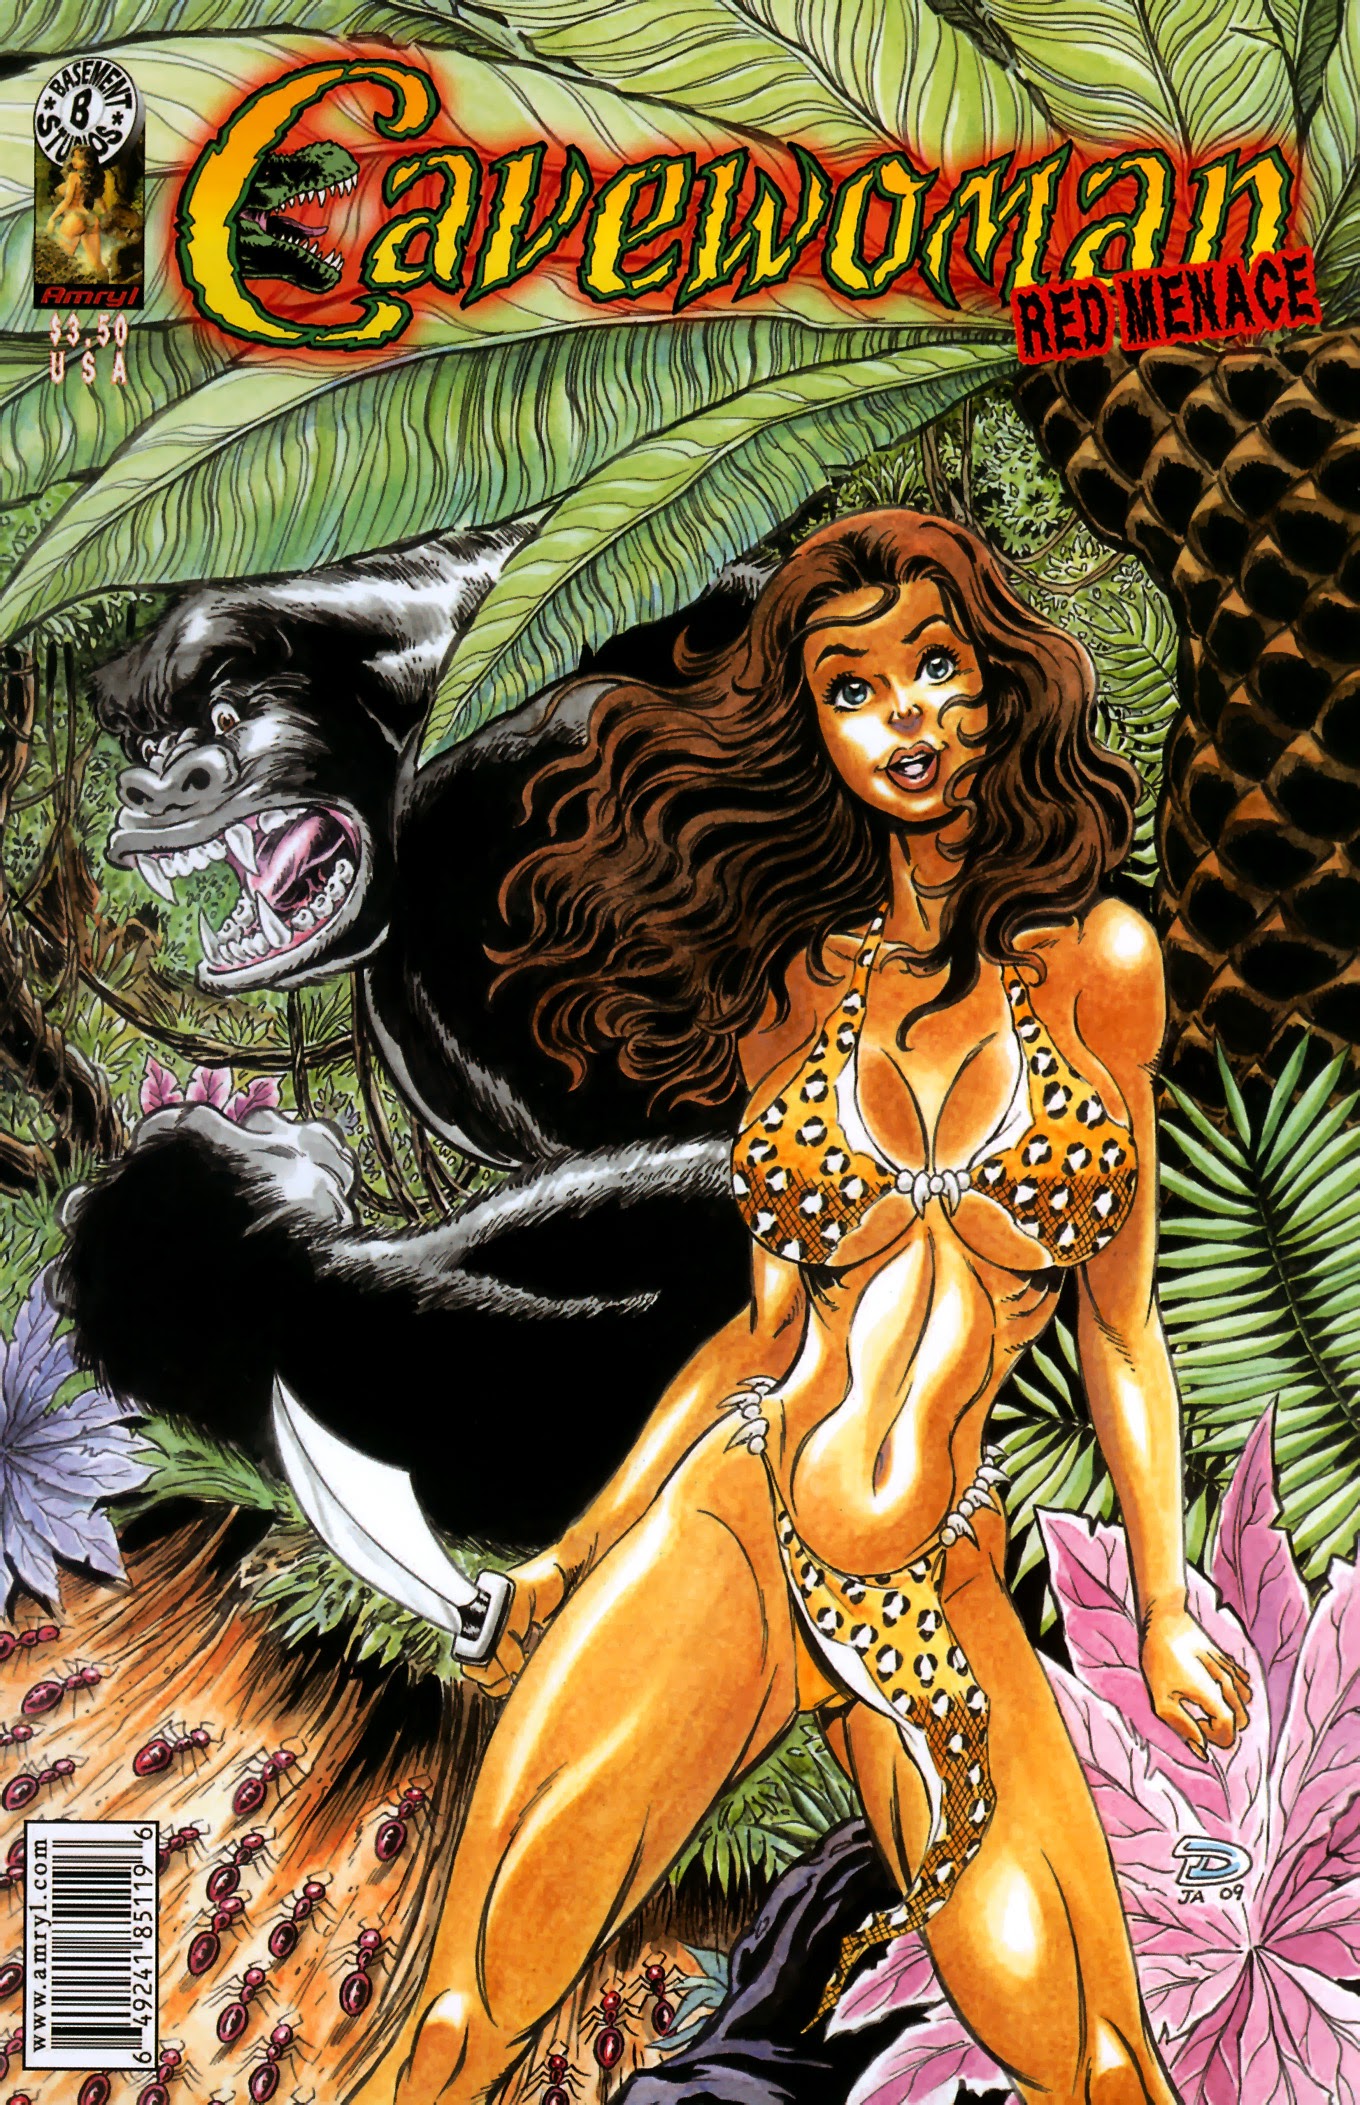 Read online Cavewoman: Red Menace comic -  Issue # Full - 1